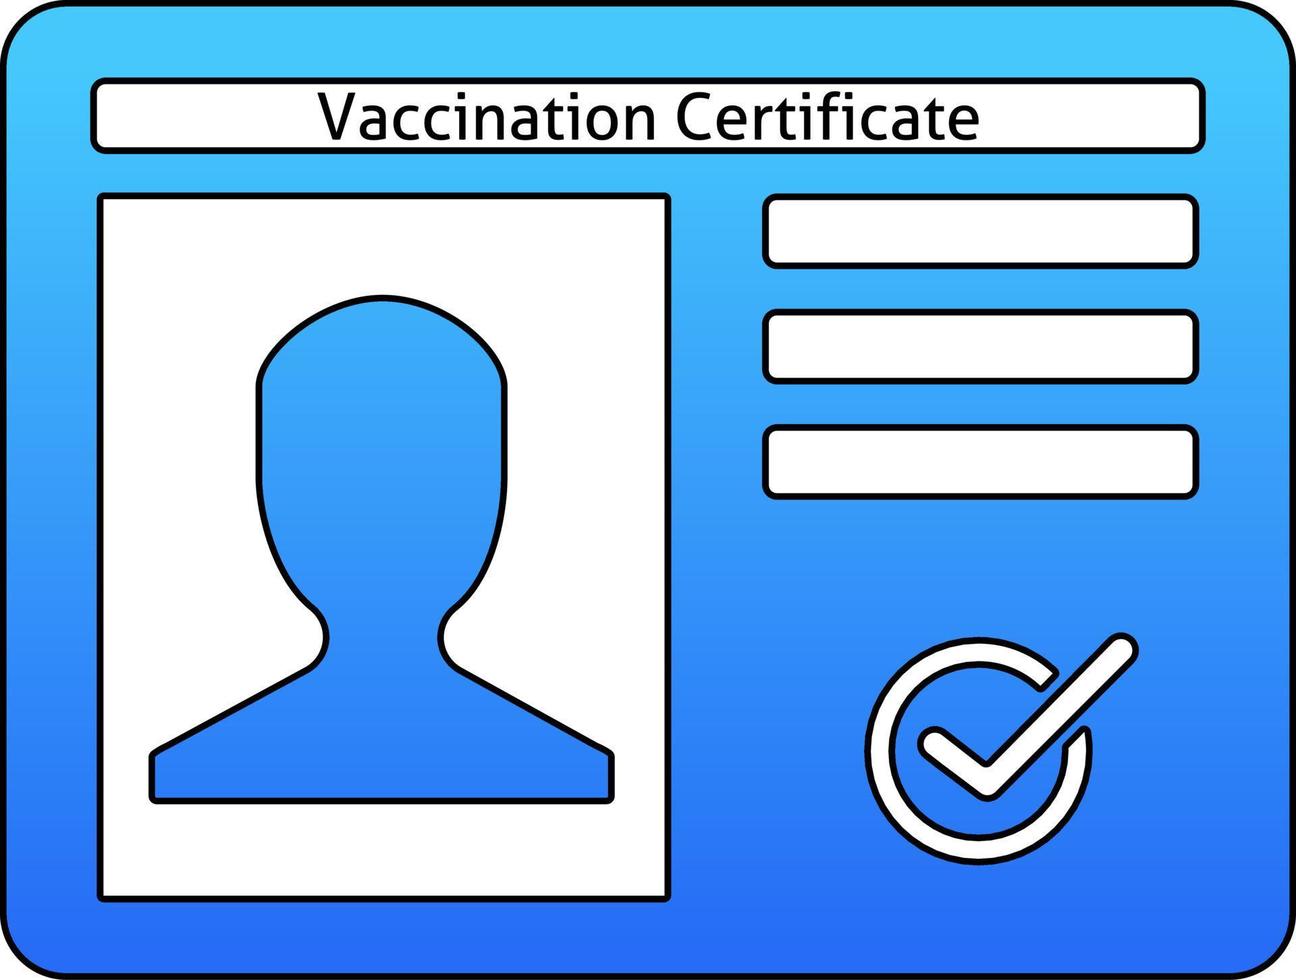 Vaccination certificate. Card of vaccine certificate for permission and admission. Vector illustration of vaccine card for medical graphic resource about virus and pandemic. COVID-19 social issue